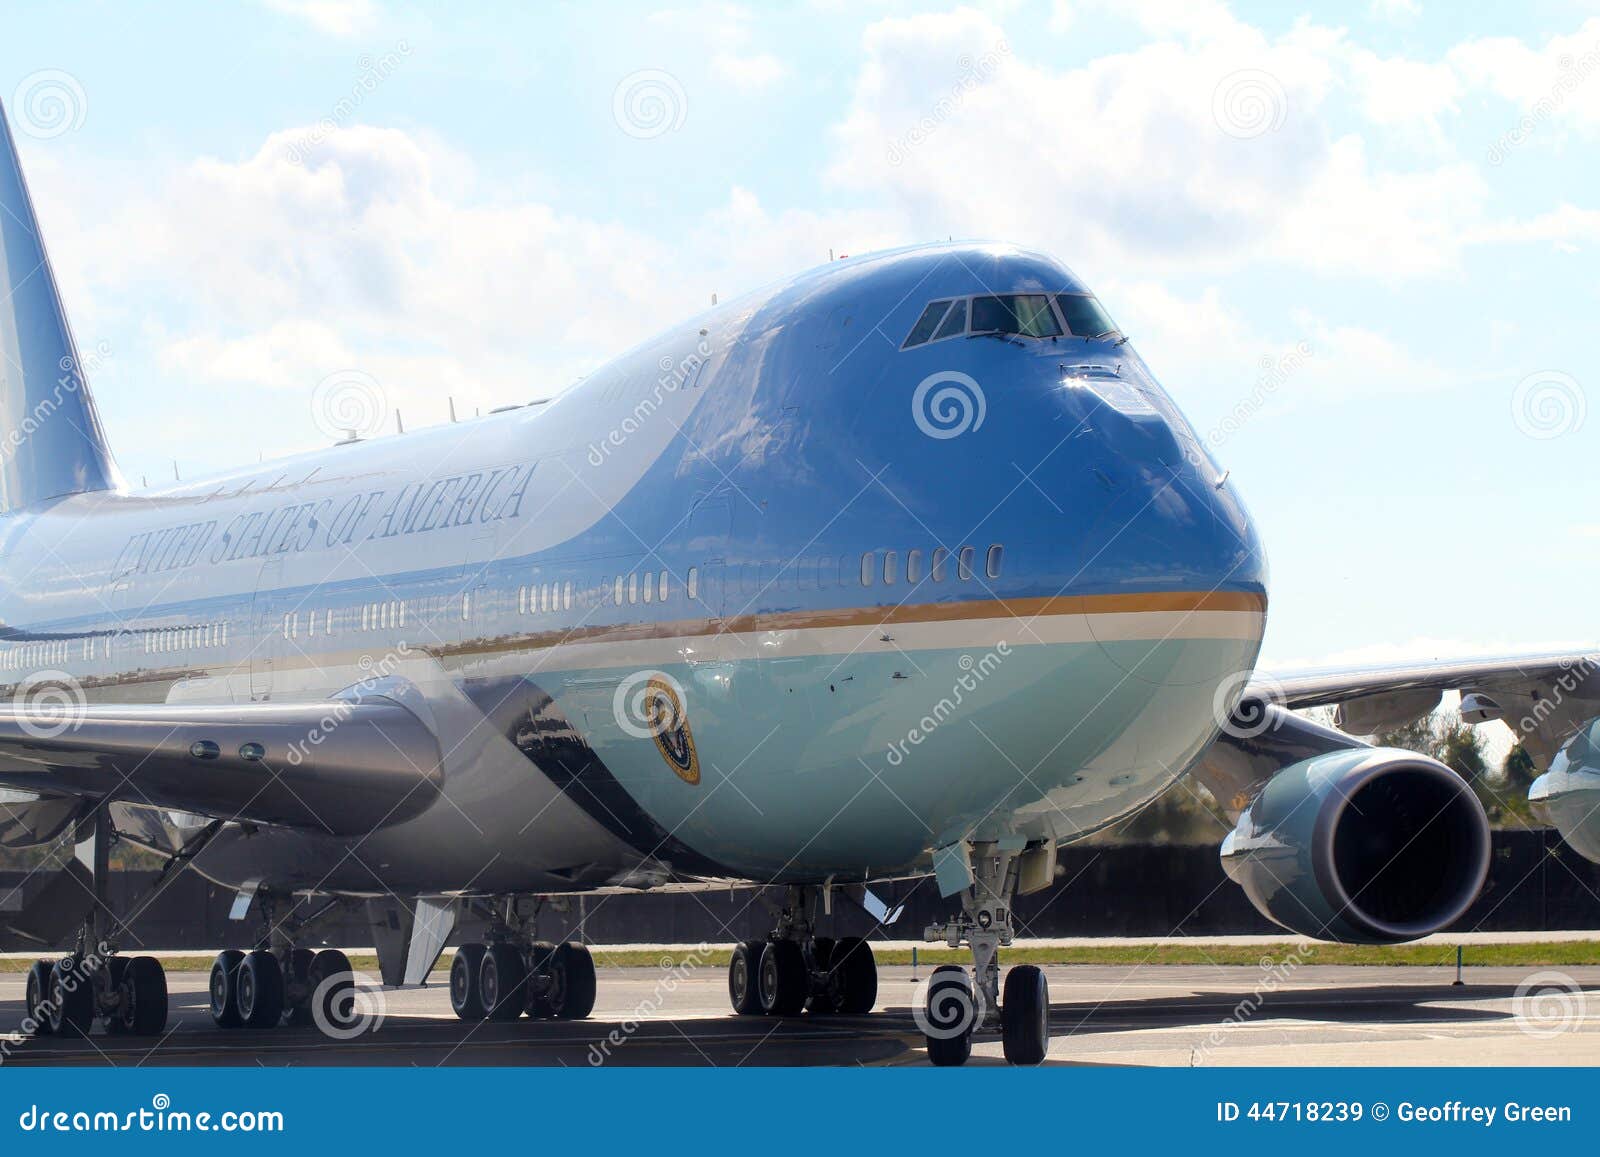 air force one taxiing at jfk international new york city, new york